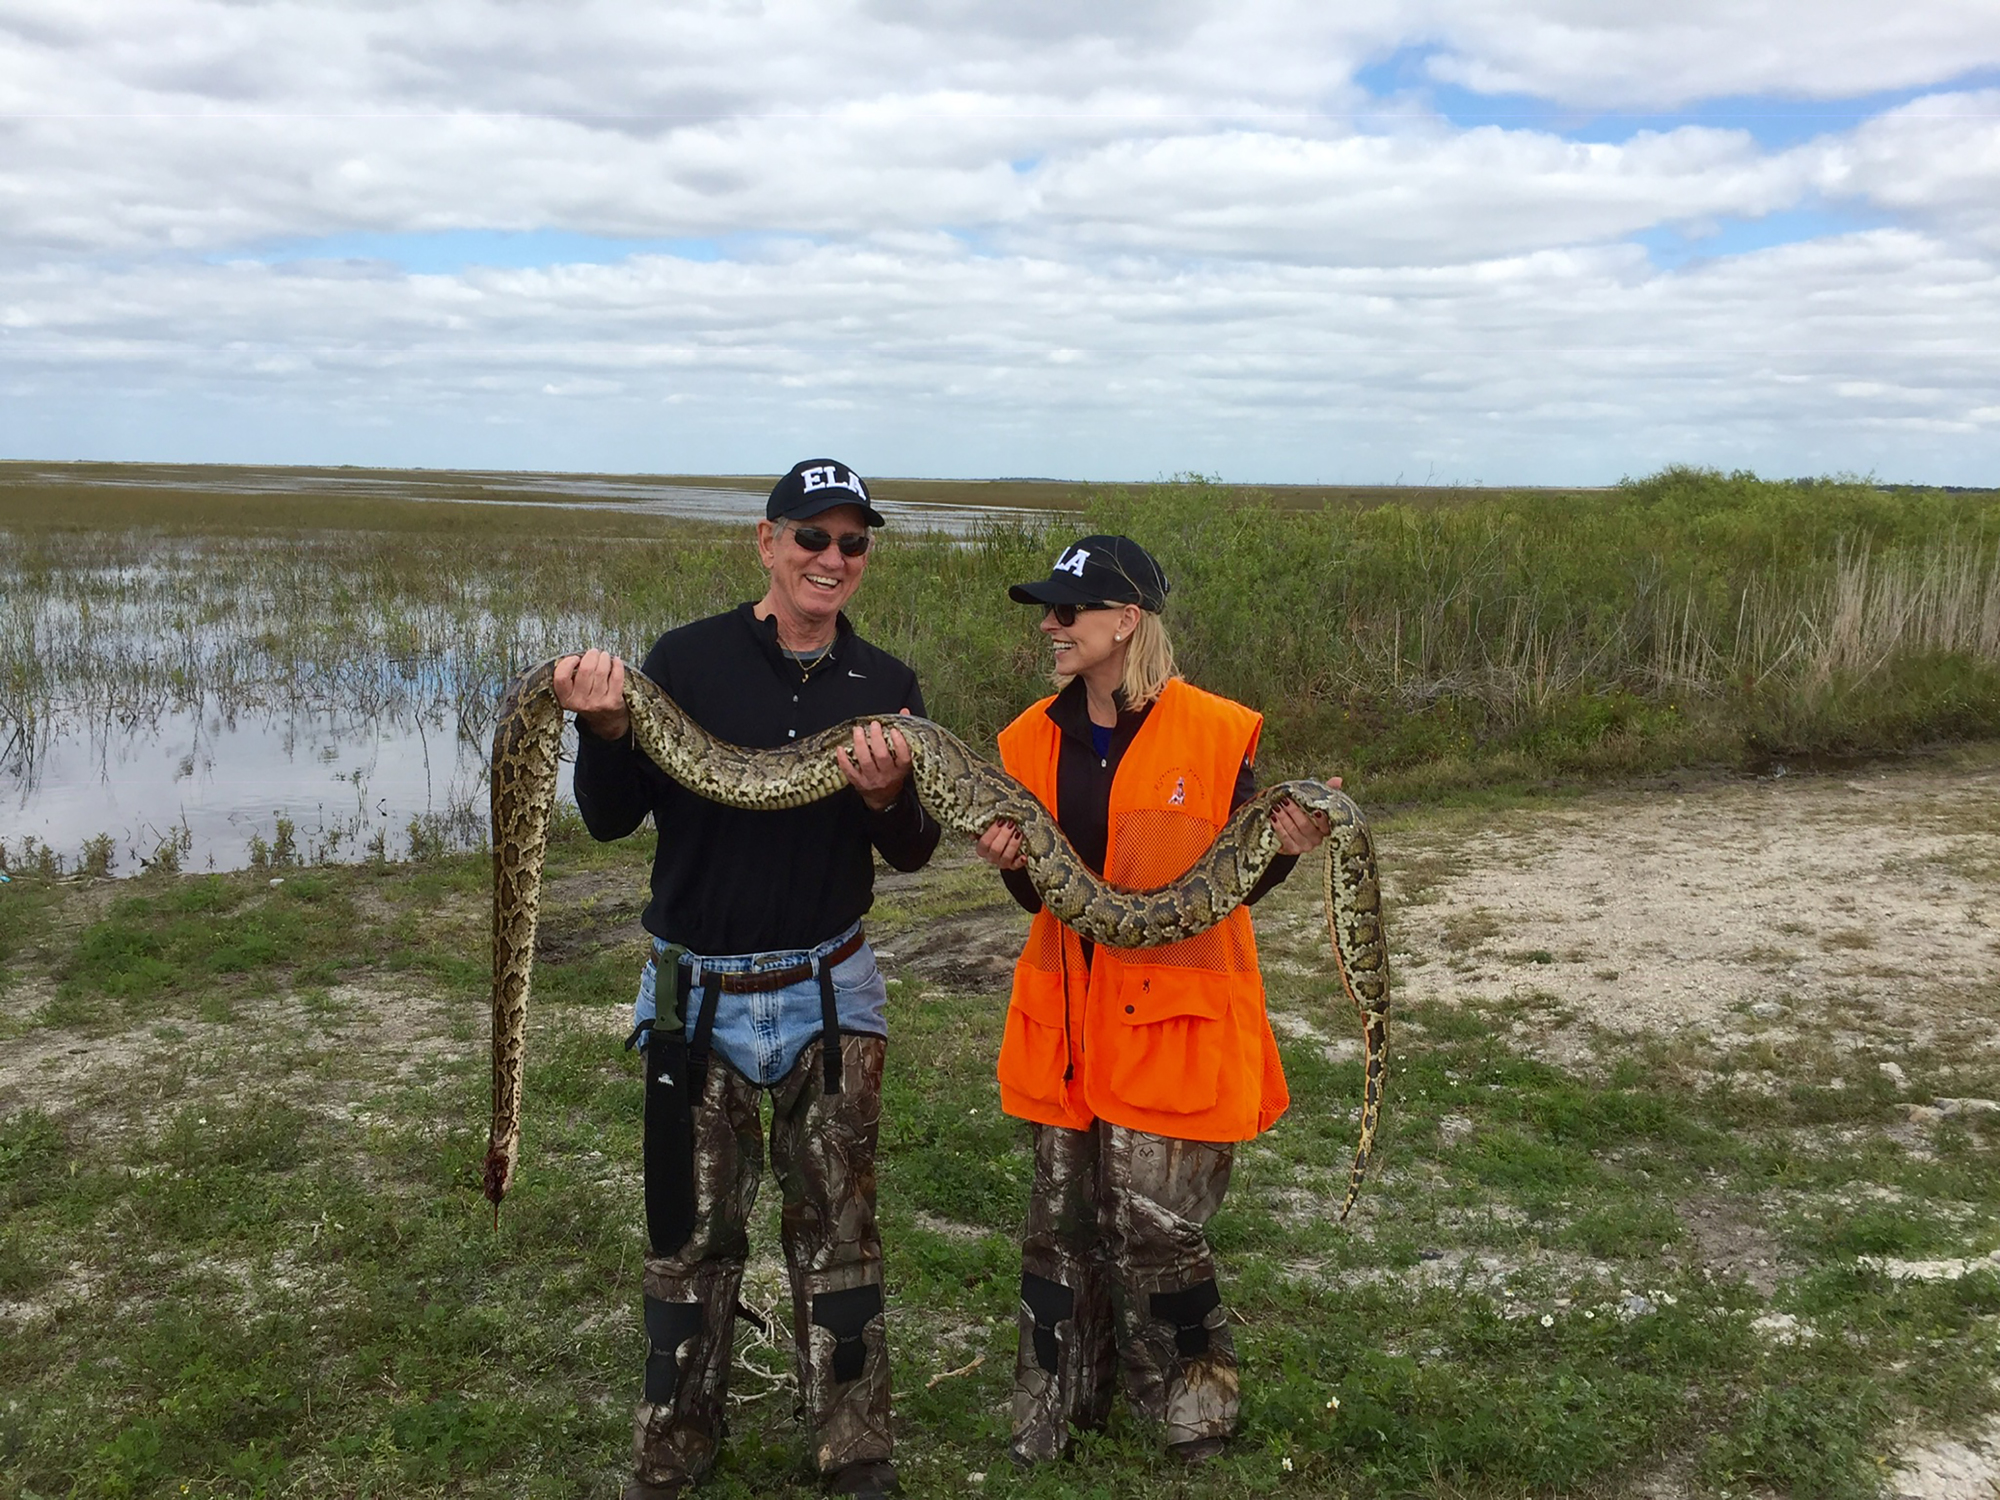 Edison National Bank co-founders Geoff and Robbie Roepstorff enjoy hunting pythons together. The even spent their 25th anniversary in the Everglades. Courtesy Geoff and Robbie  Roepstorff